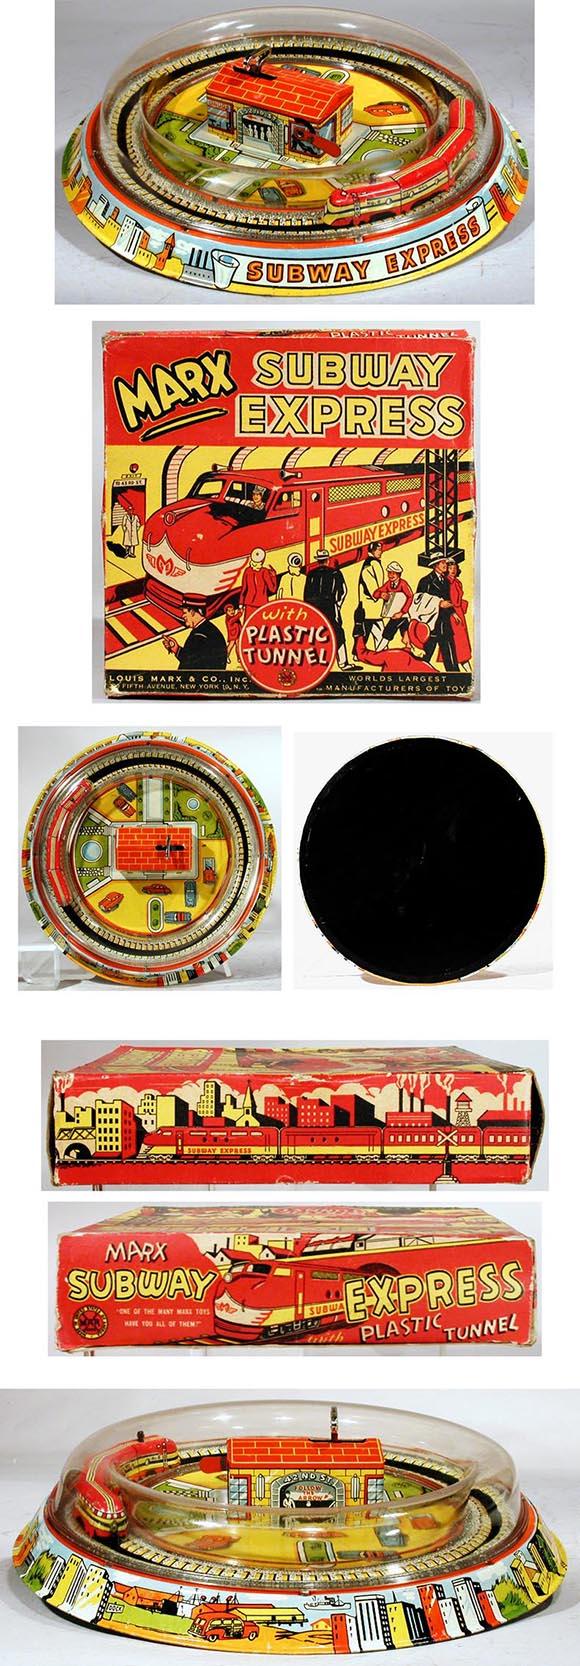 1954 Marx, Subway Express with Plastic Tunnel in Original Box